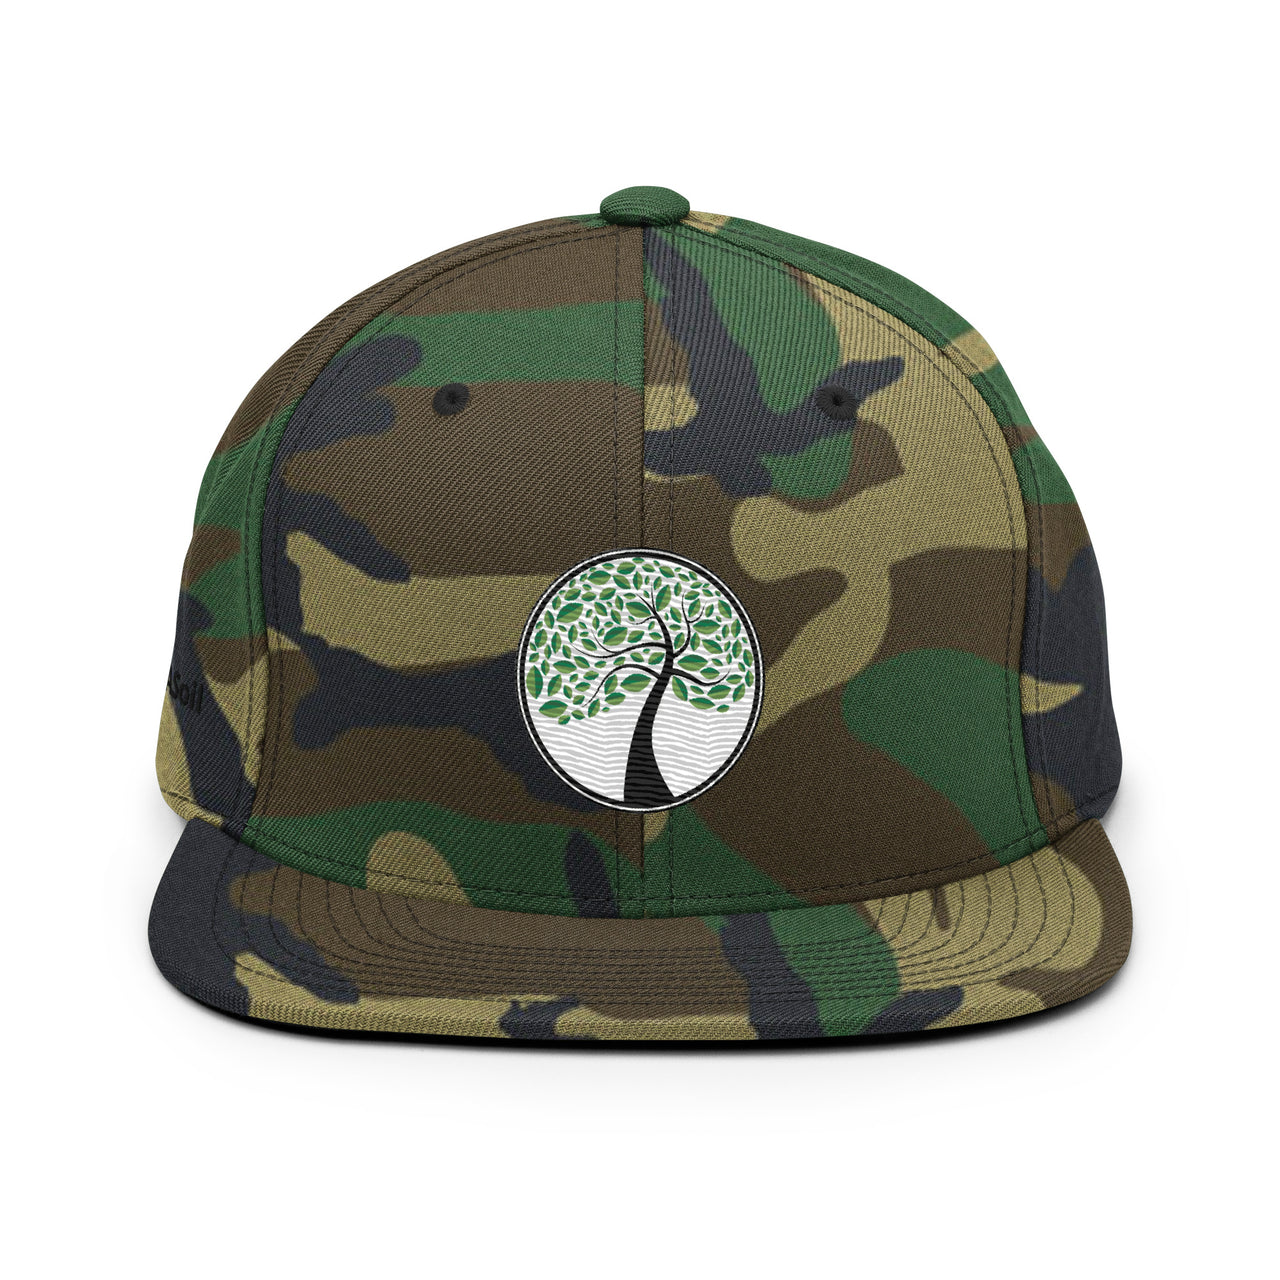 Loyal To The Soil - Snapback Hat